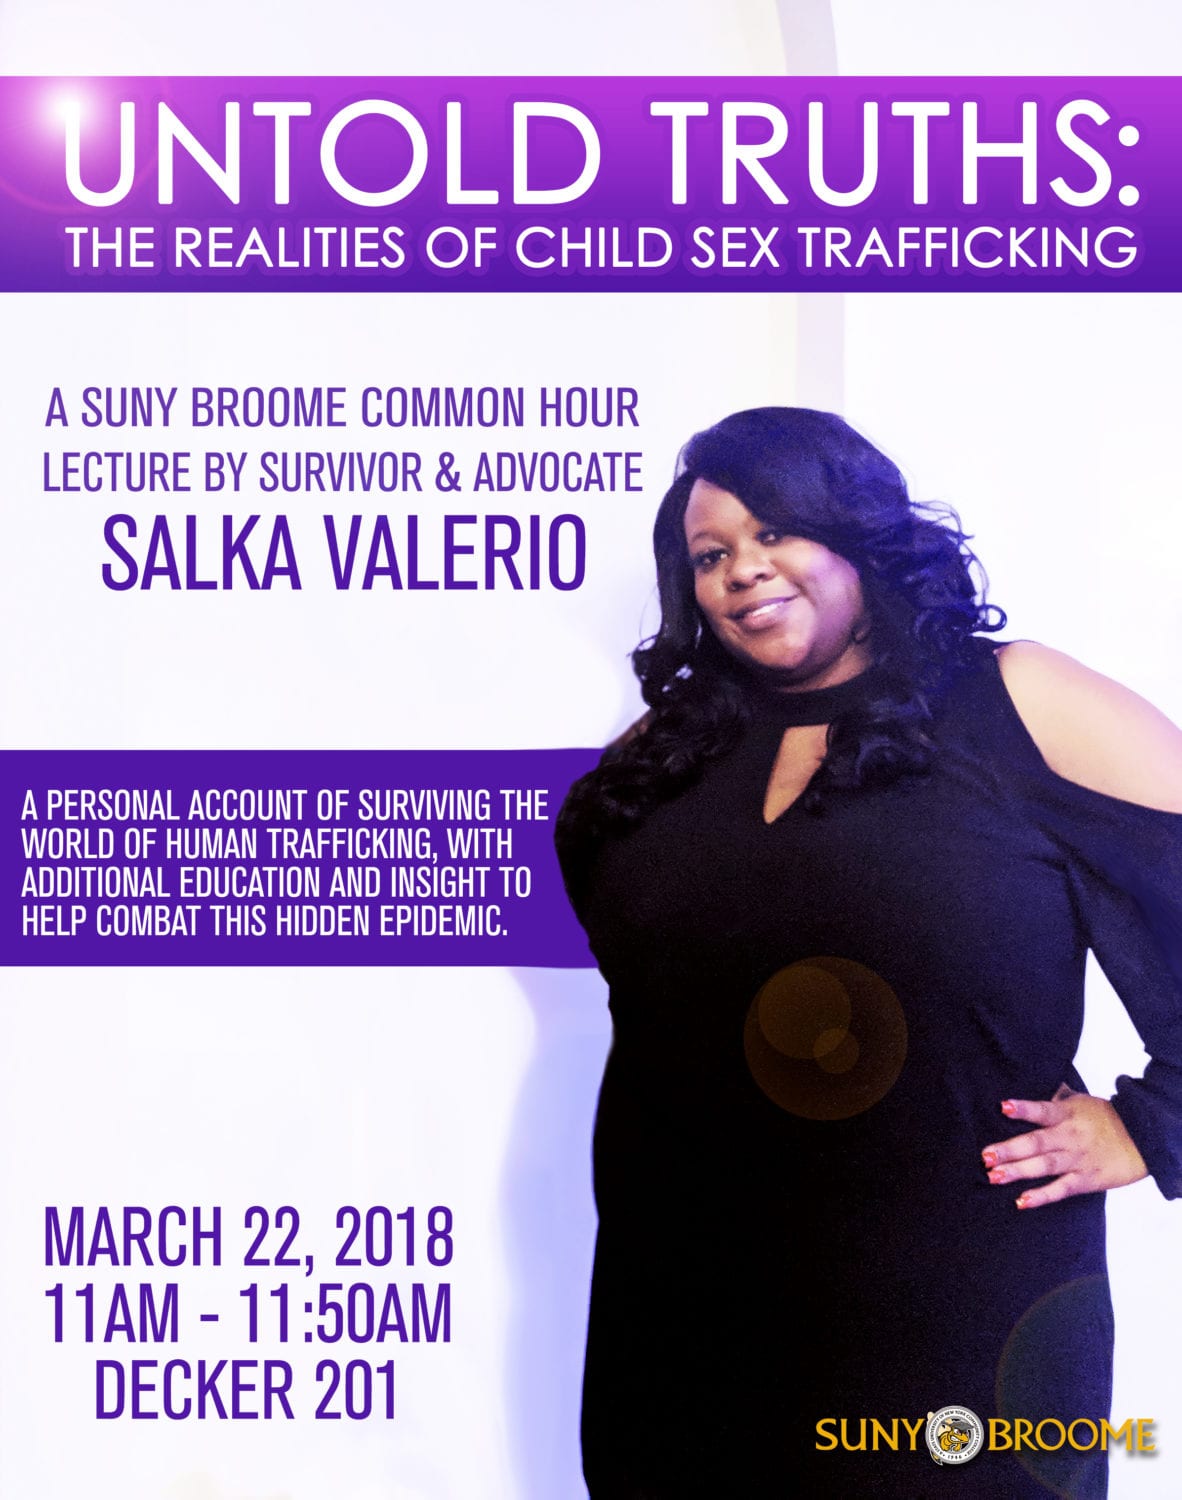 March 22 Talk: The Realities of Child Sex Trafficking